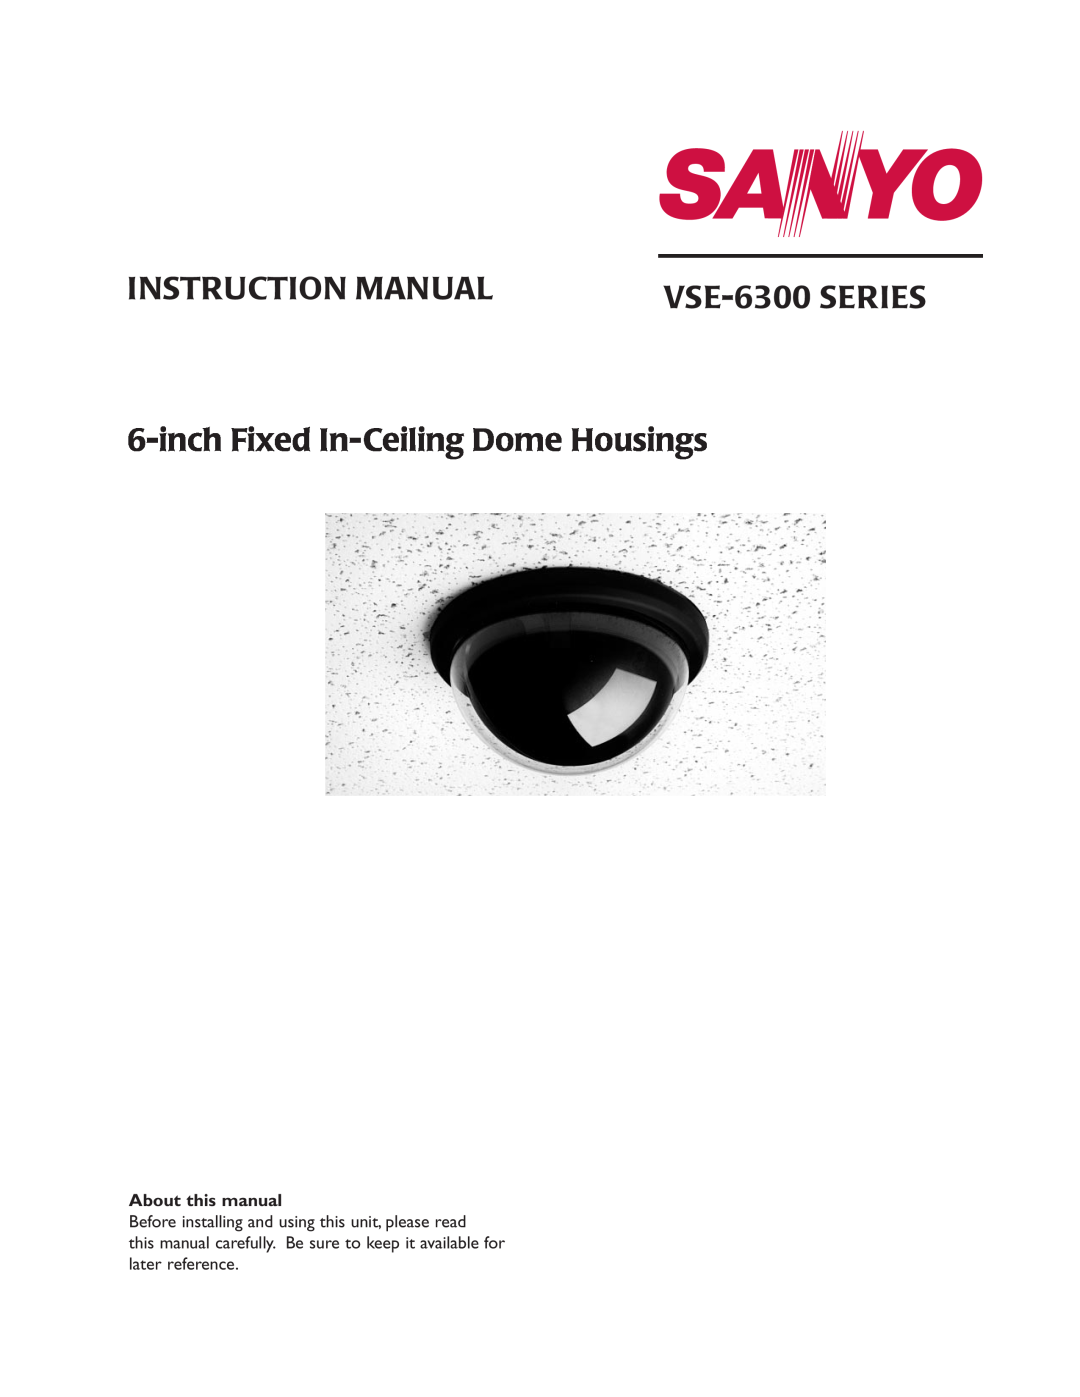 Sanyo instruction manual About this manual, inchFixed In-CeilingDome Housings, VSE-6300SERIES 